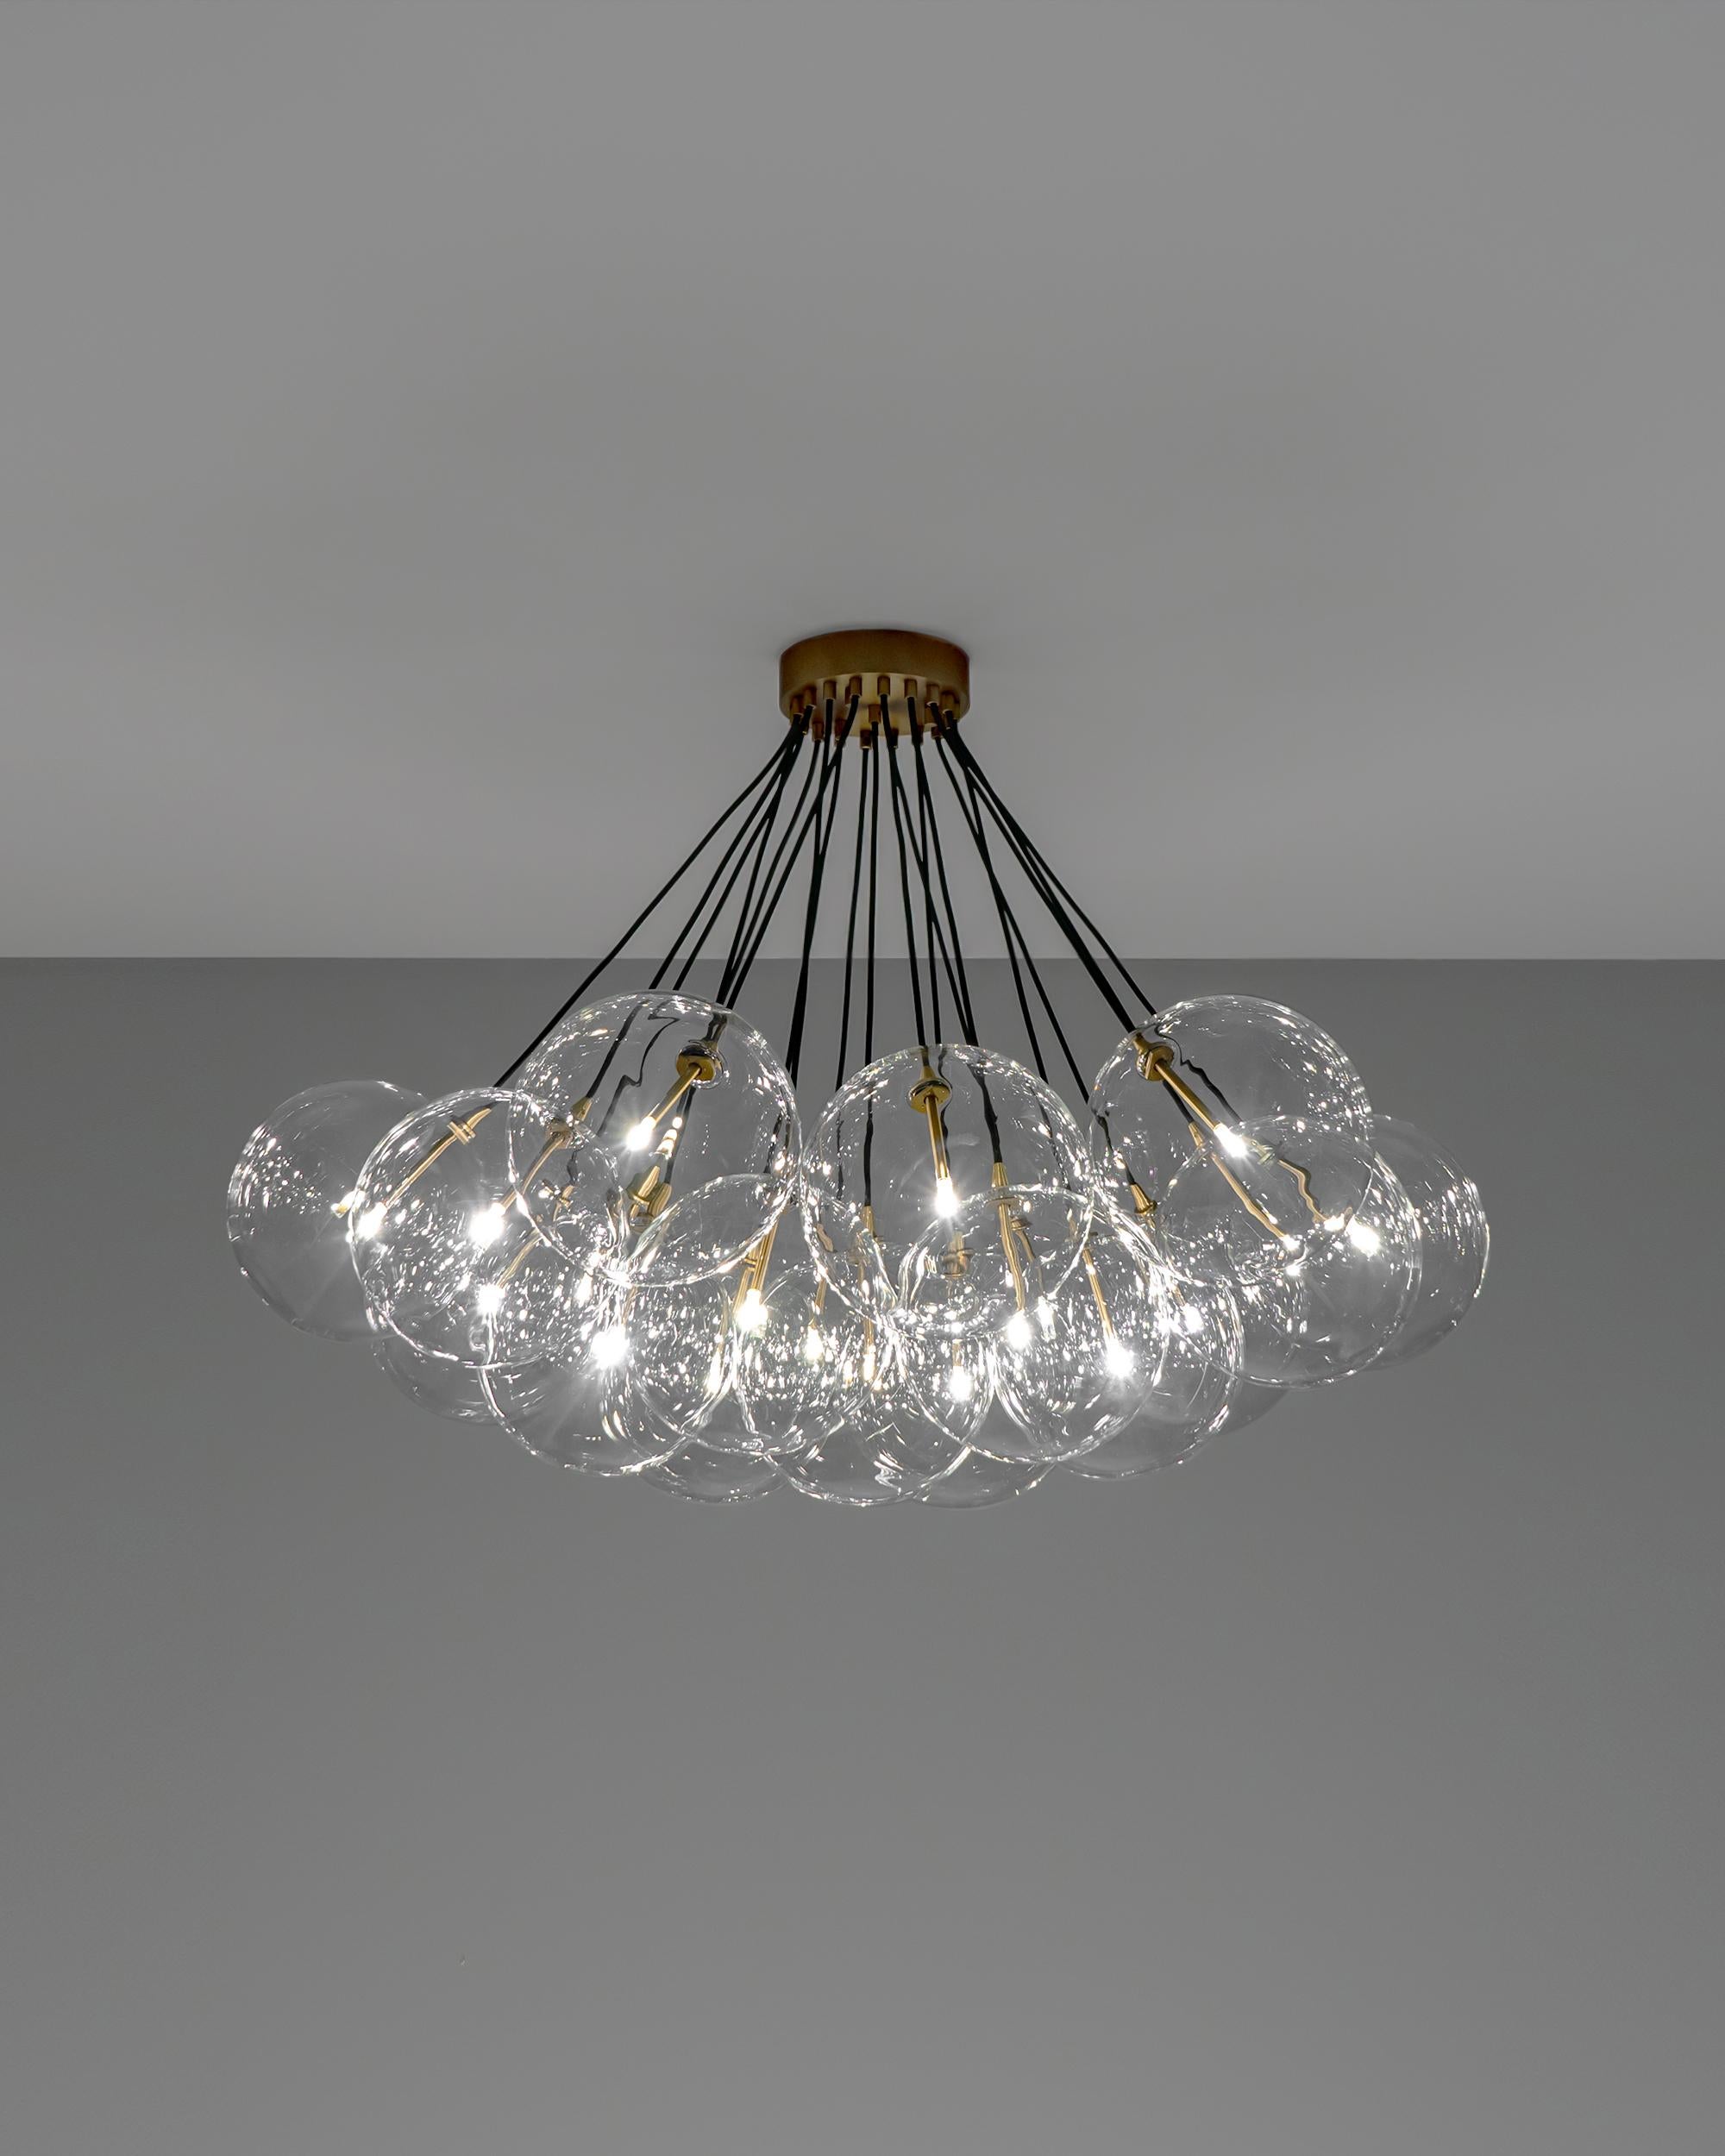 Cloud 250 chandelier by Schwung
Dimensions: D 119.5 x H 84.9 cm
Materials: Borosilicate Transparent Glass, Lacquered Burnished Brass
More finishes available. Please contact us

LED Bulb (included) 19 x 1.6 W
Max Wattage 19 x 2 W
Total Lumens 3420